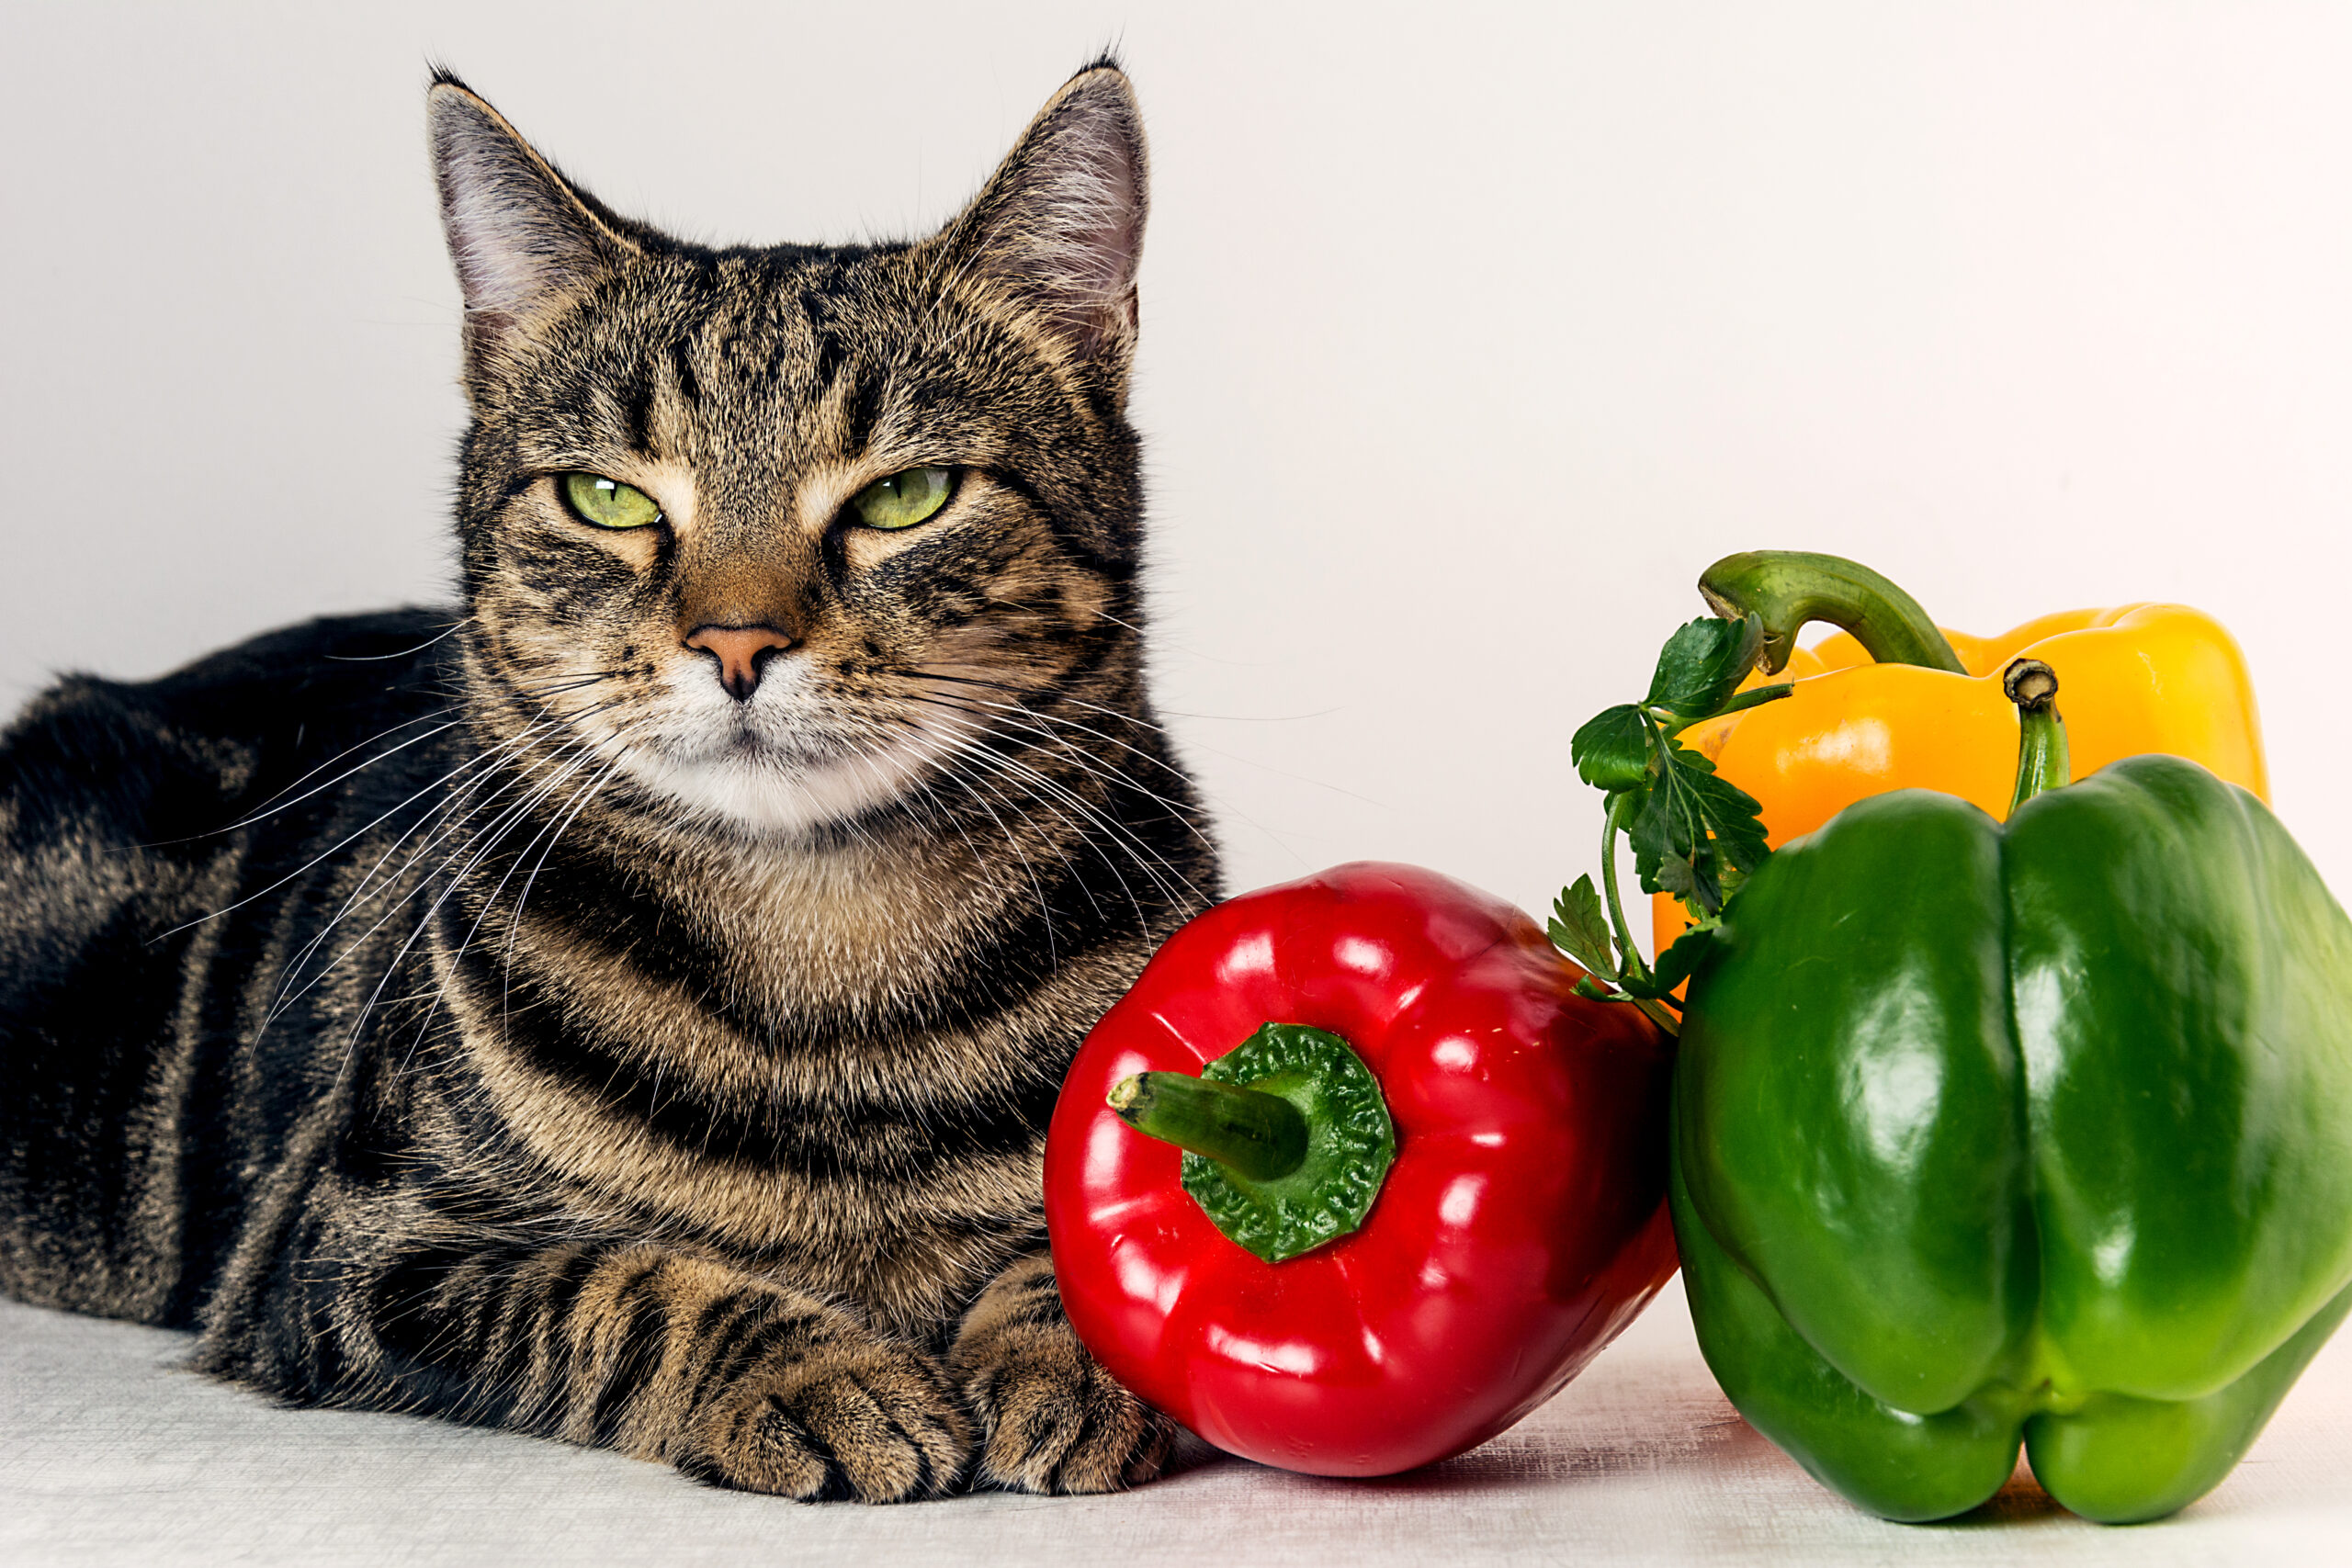 Cat,&,Vegetables.,Colorful,Close,Up,Photo,With,Cat,And